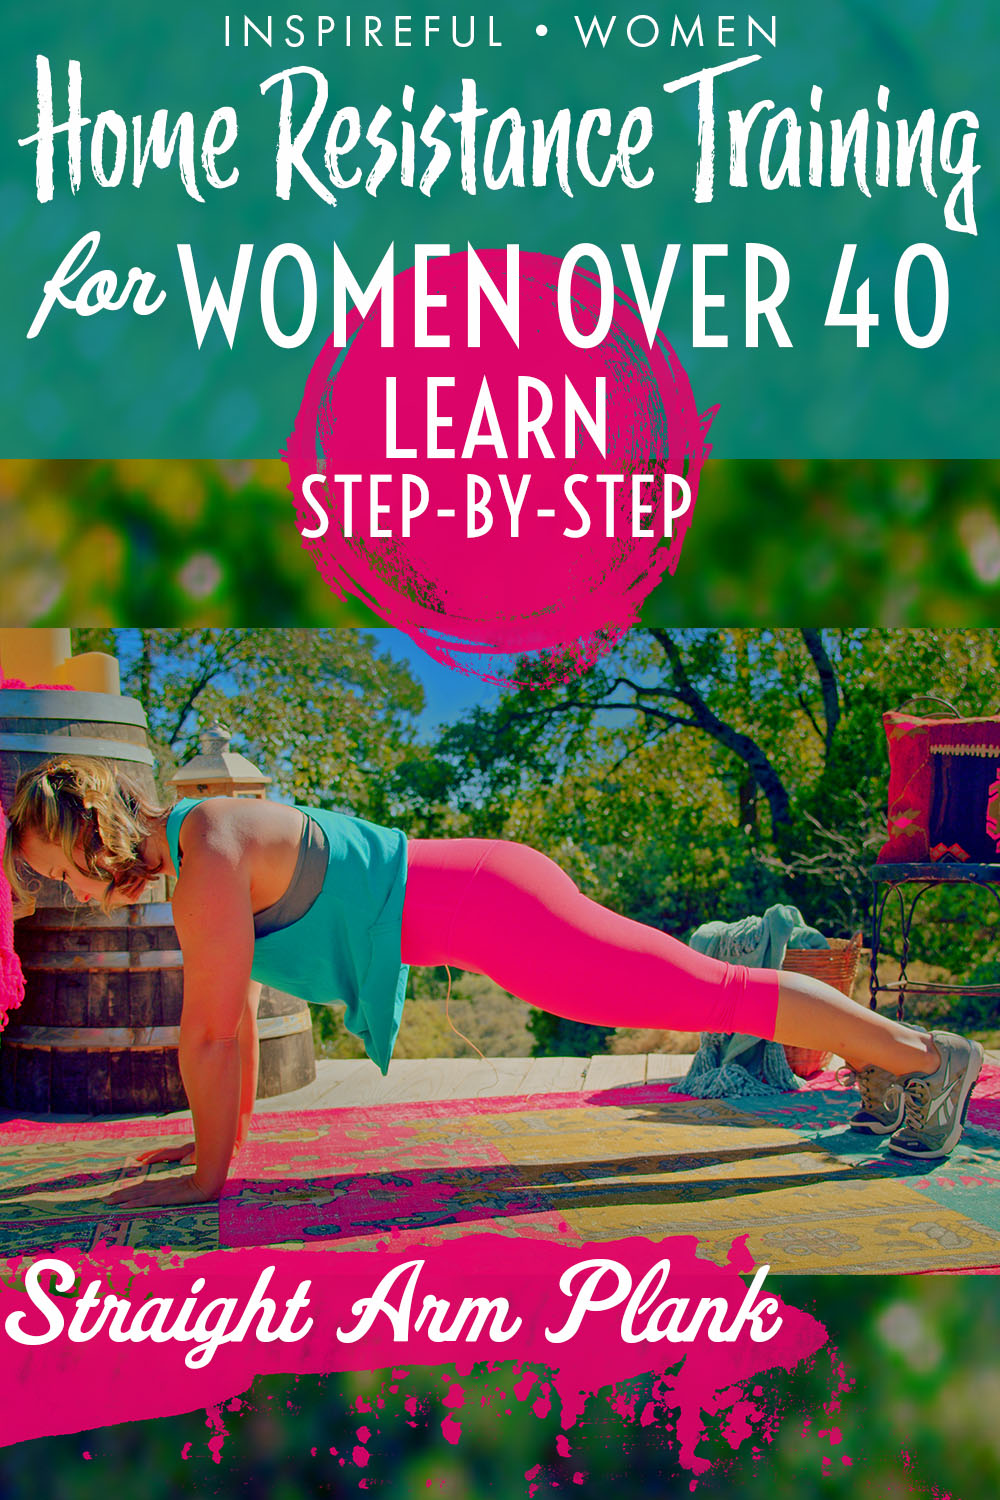 plank-straight-arm-no-equipment-bodyweight-home-core-stability-exercise-women-over-40